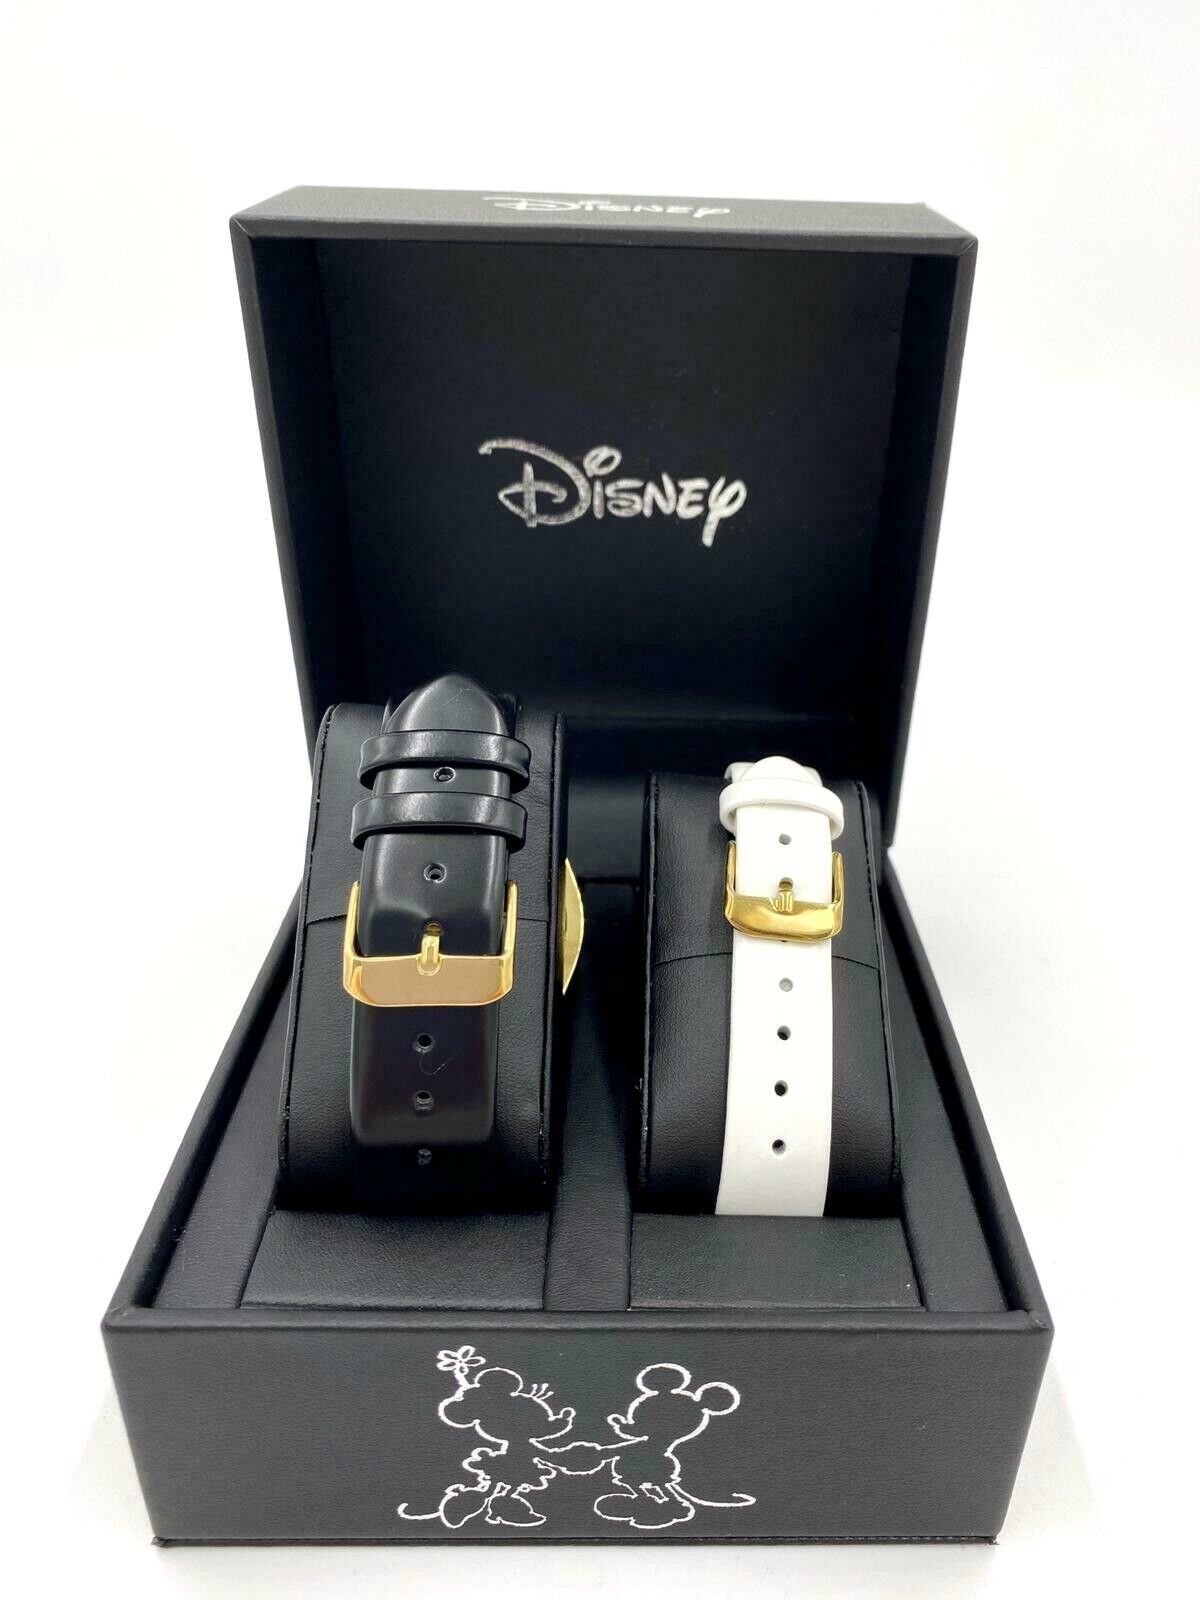 Disney His & Hers Mickey & Minnie Mouse Leather Strap Couple Set Watches